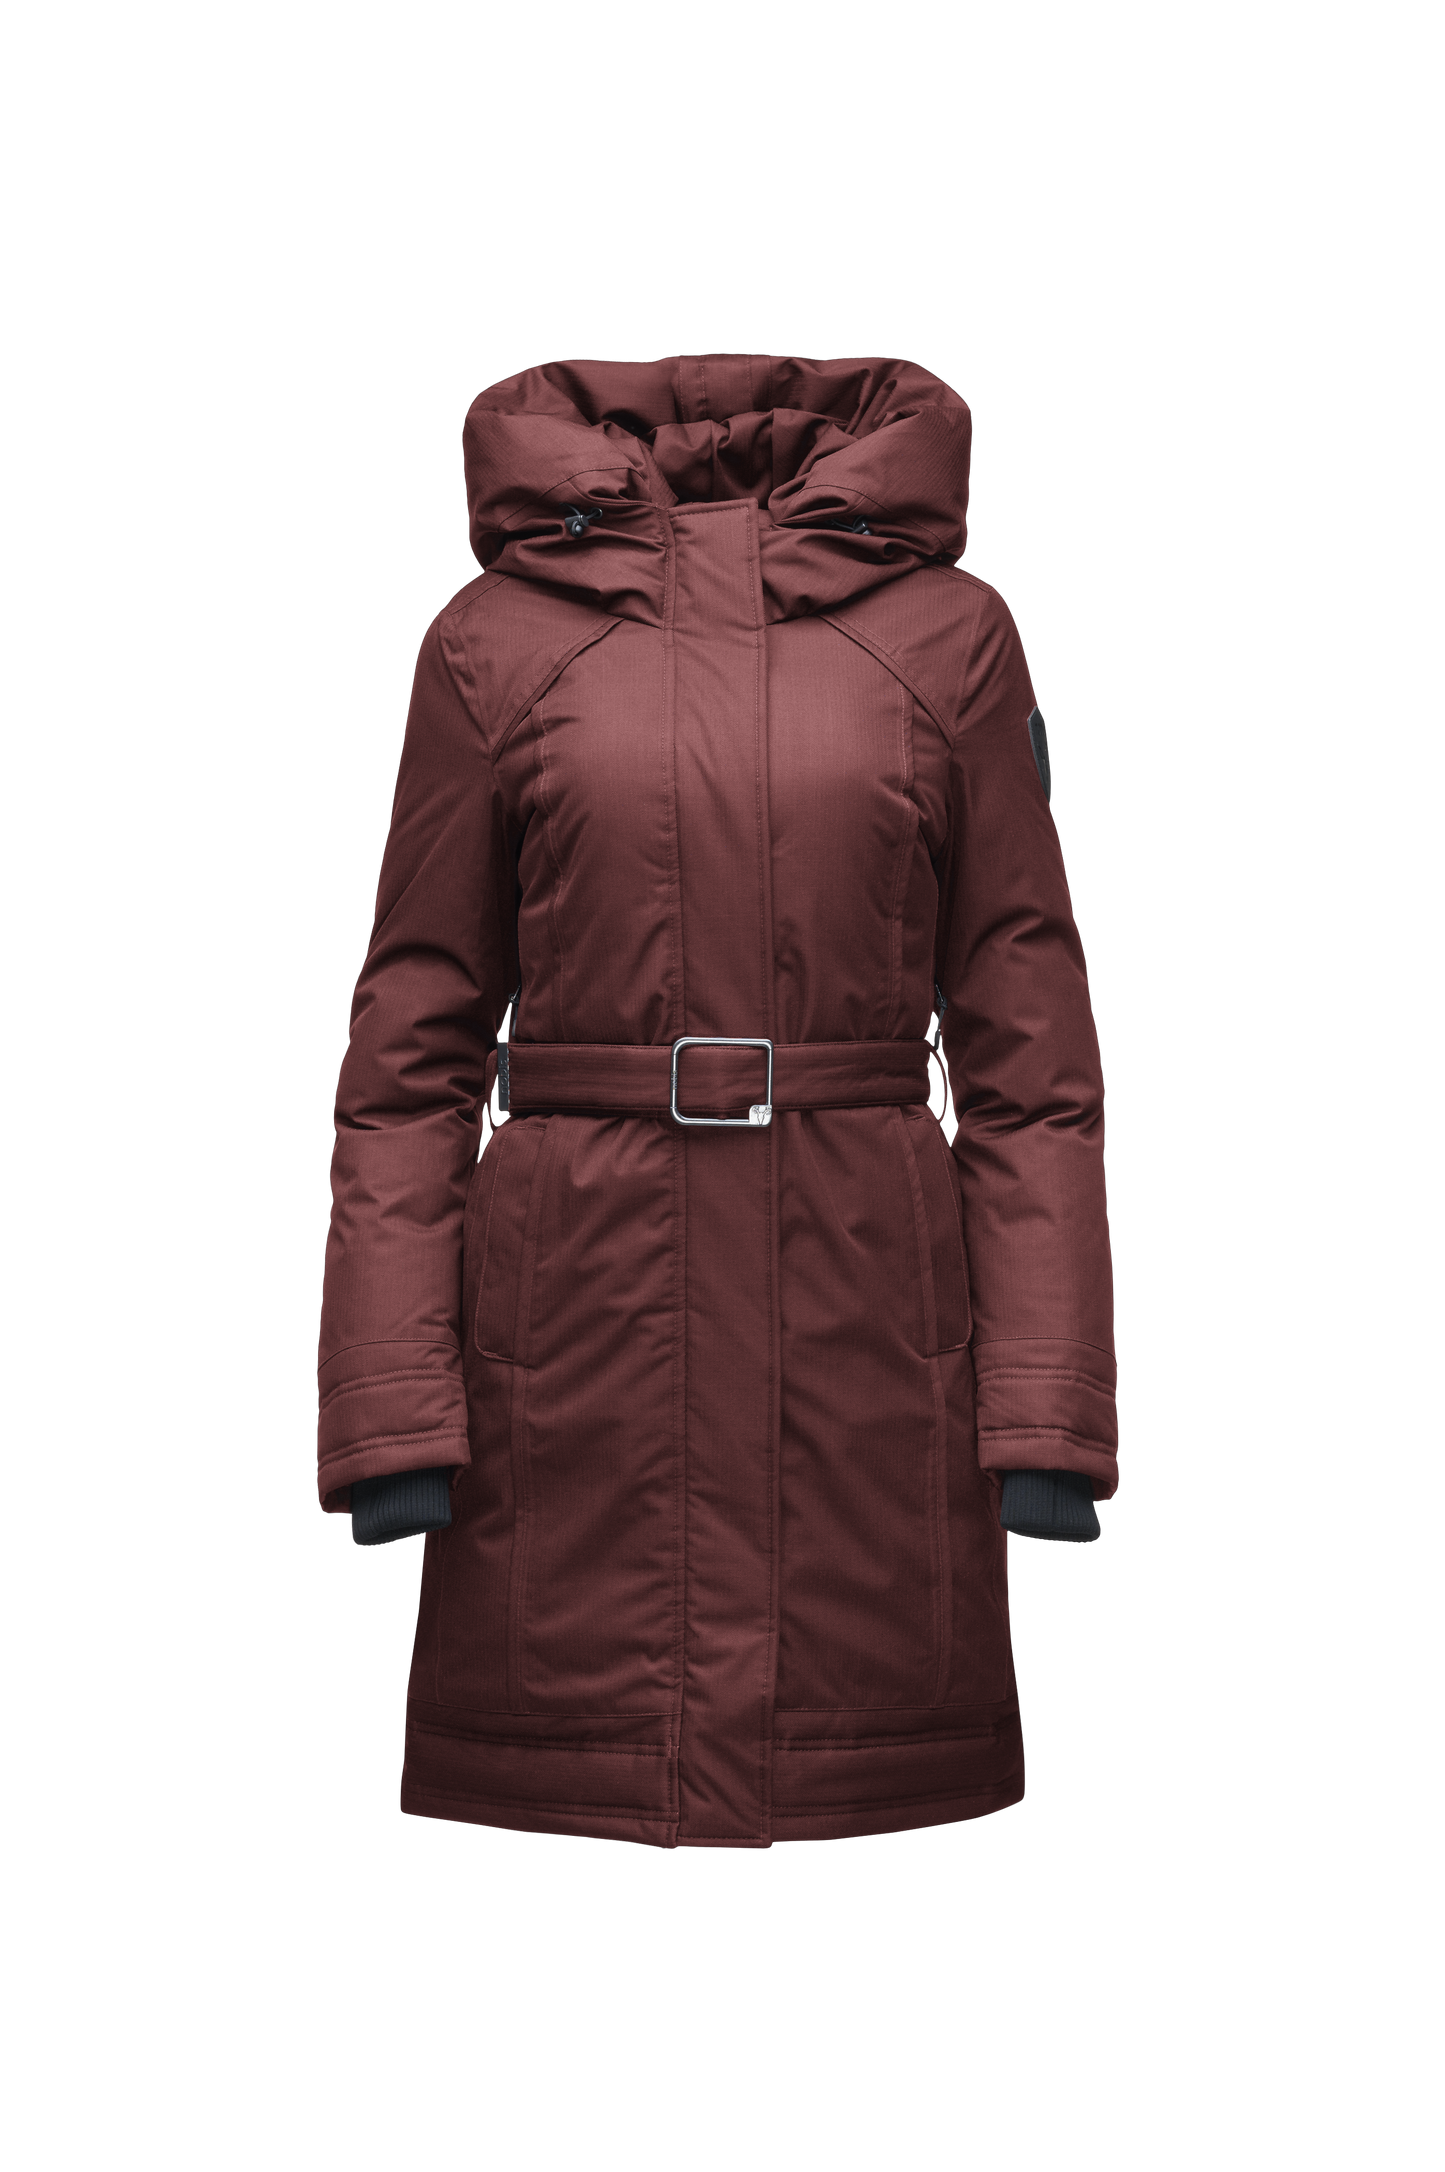 Women's Thigh length own parka with a furless oversized hood in CH Red Rum